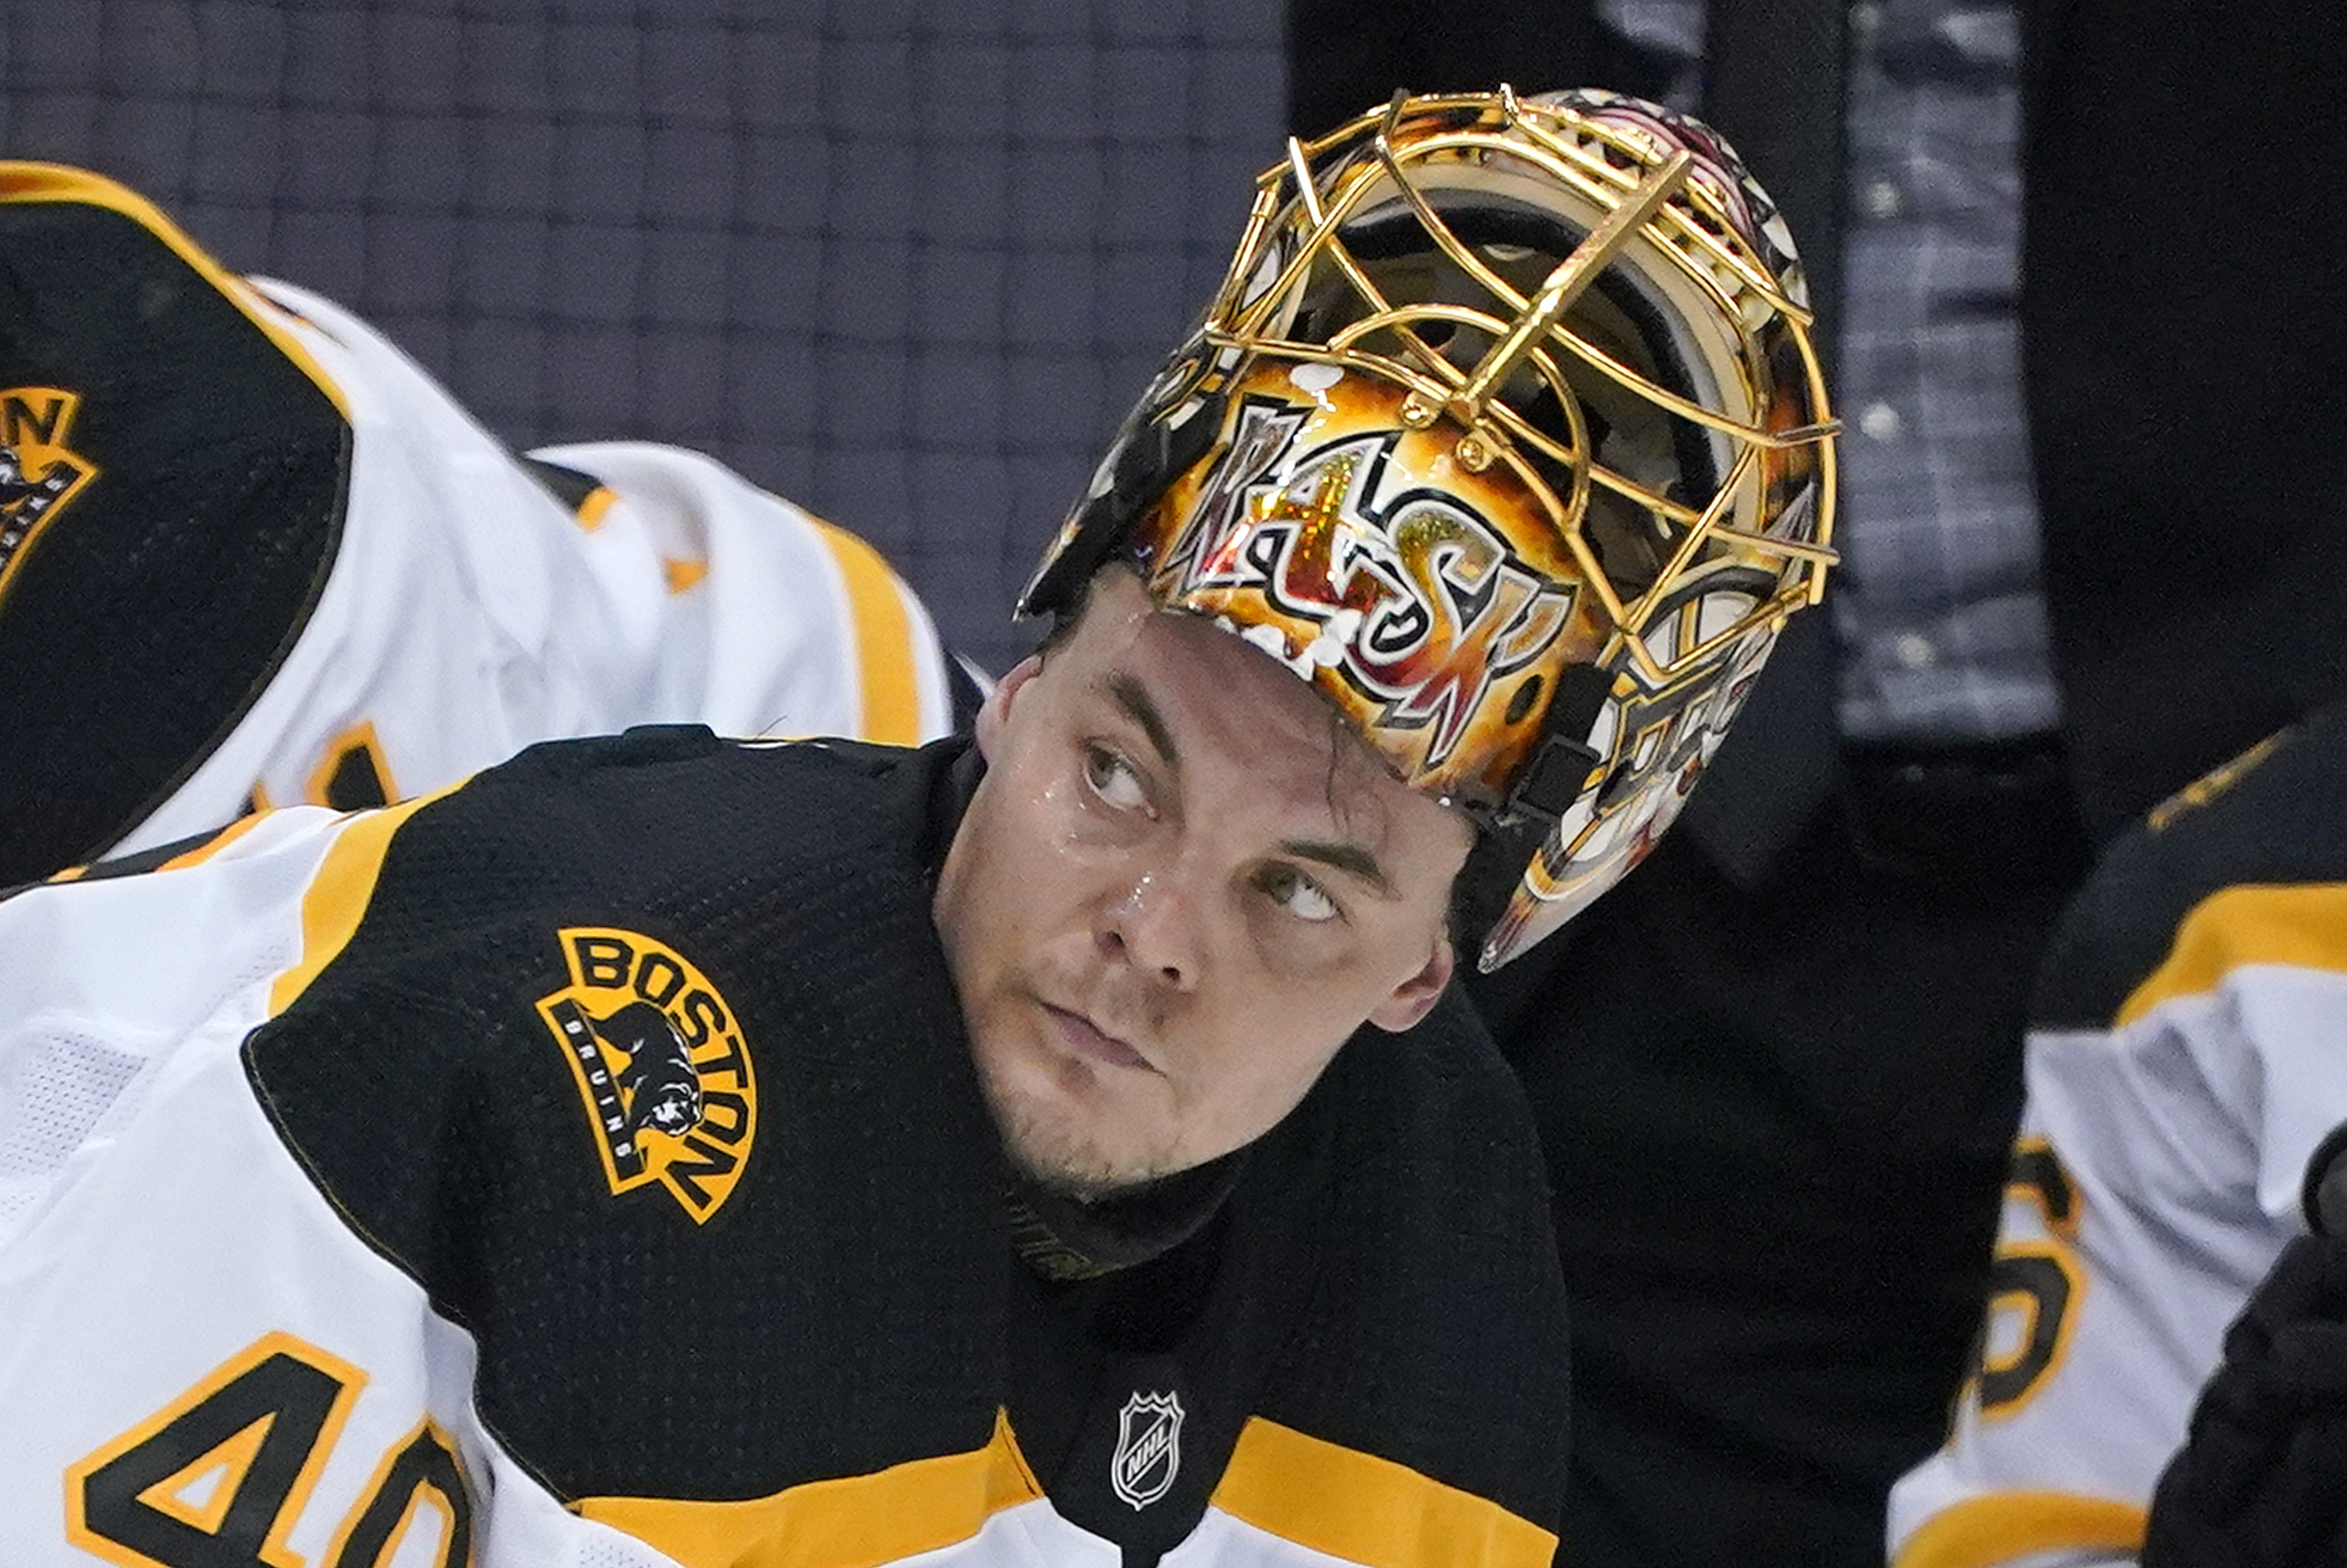 Rask agrees to 1-year deal to return to Bruins goal